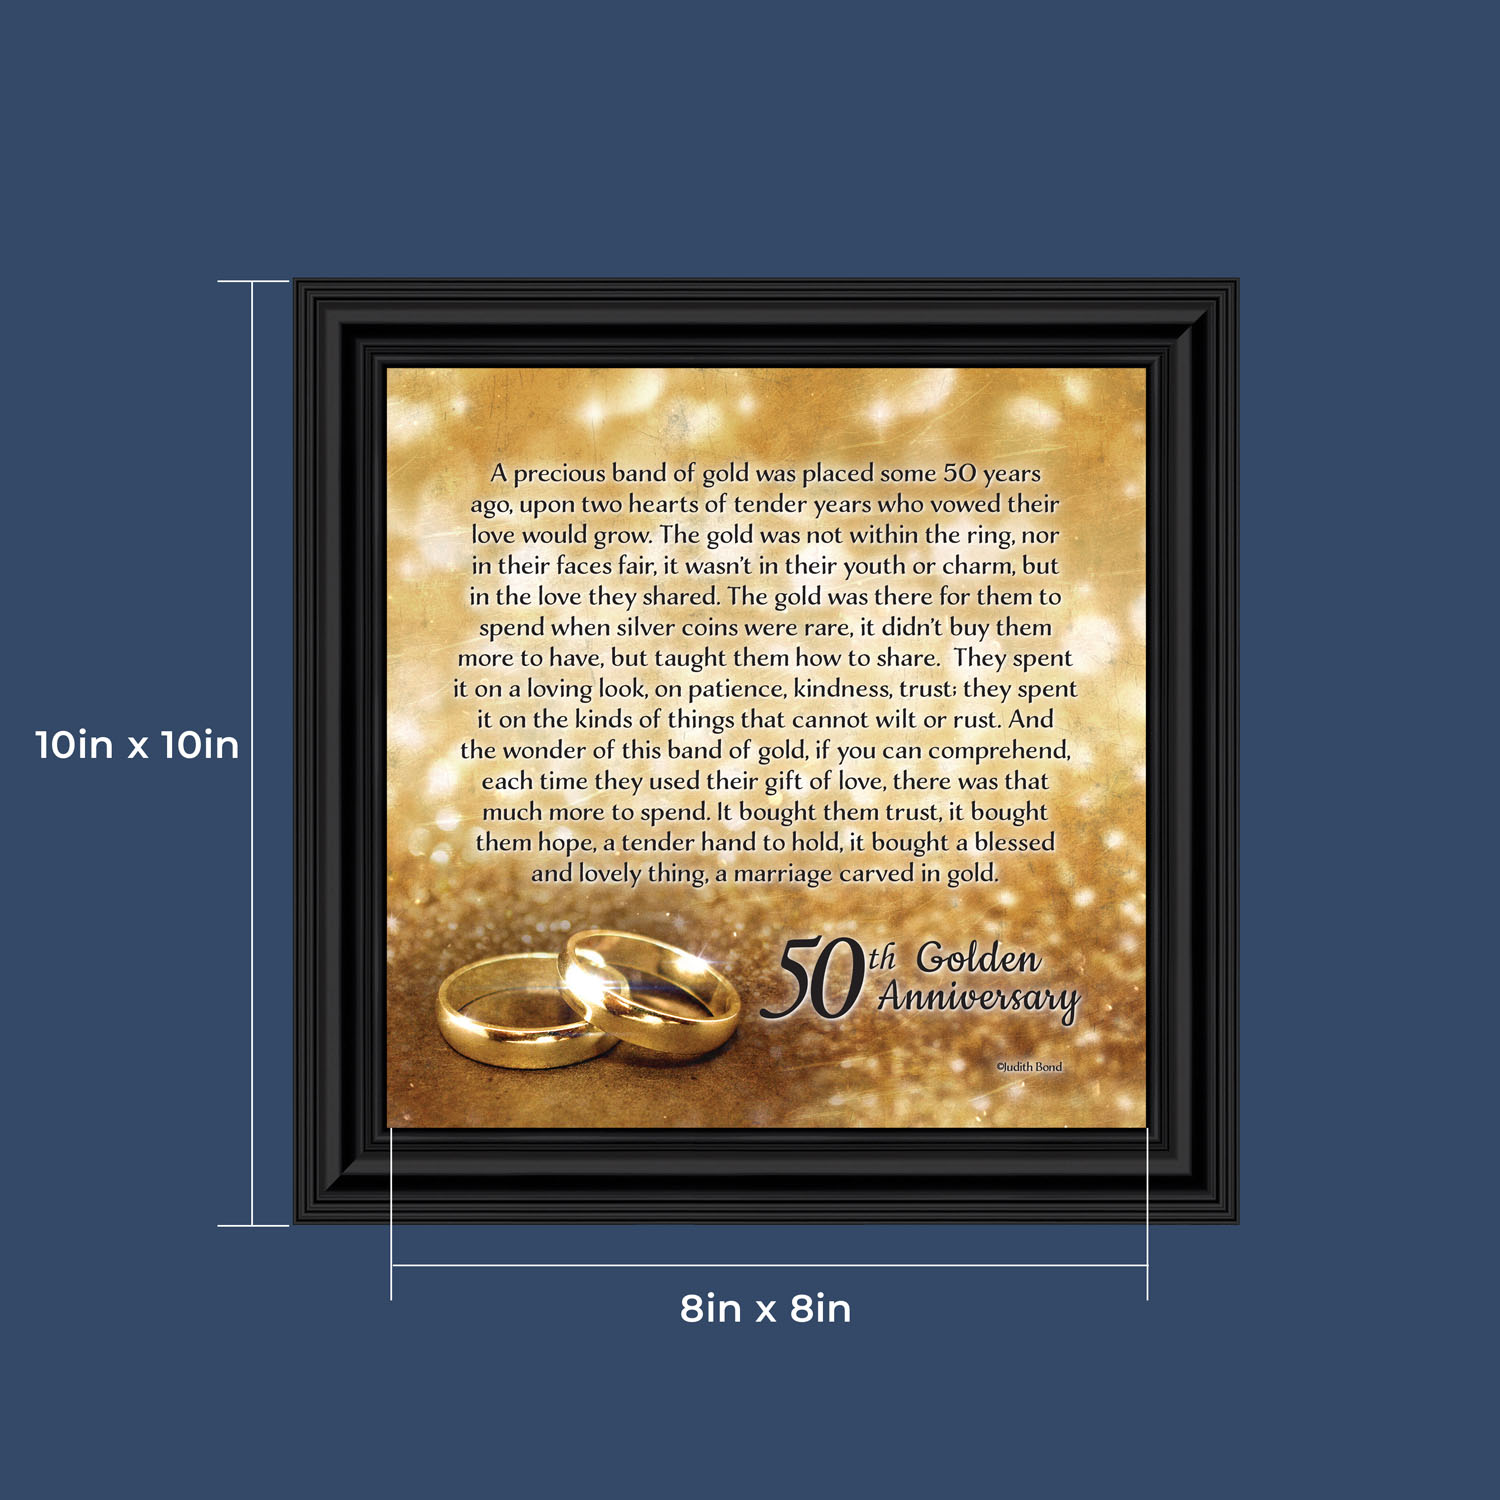 50th Wedding Anniversary Gifts for Parents, 50th Anniversary Decorations for Party, Golden Anniversary 50 Year Gifts, 50th Anniversary Gifts for Couples, Gift with 50th Anniversary Card 8608B - image 2 of 8